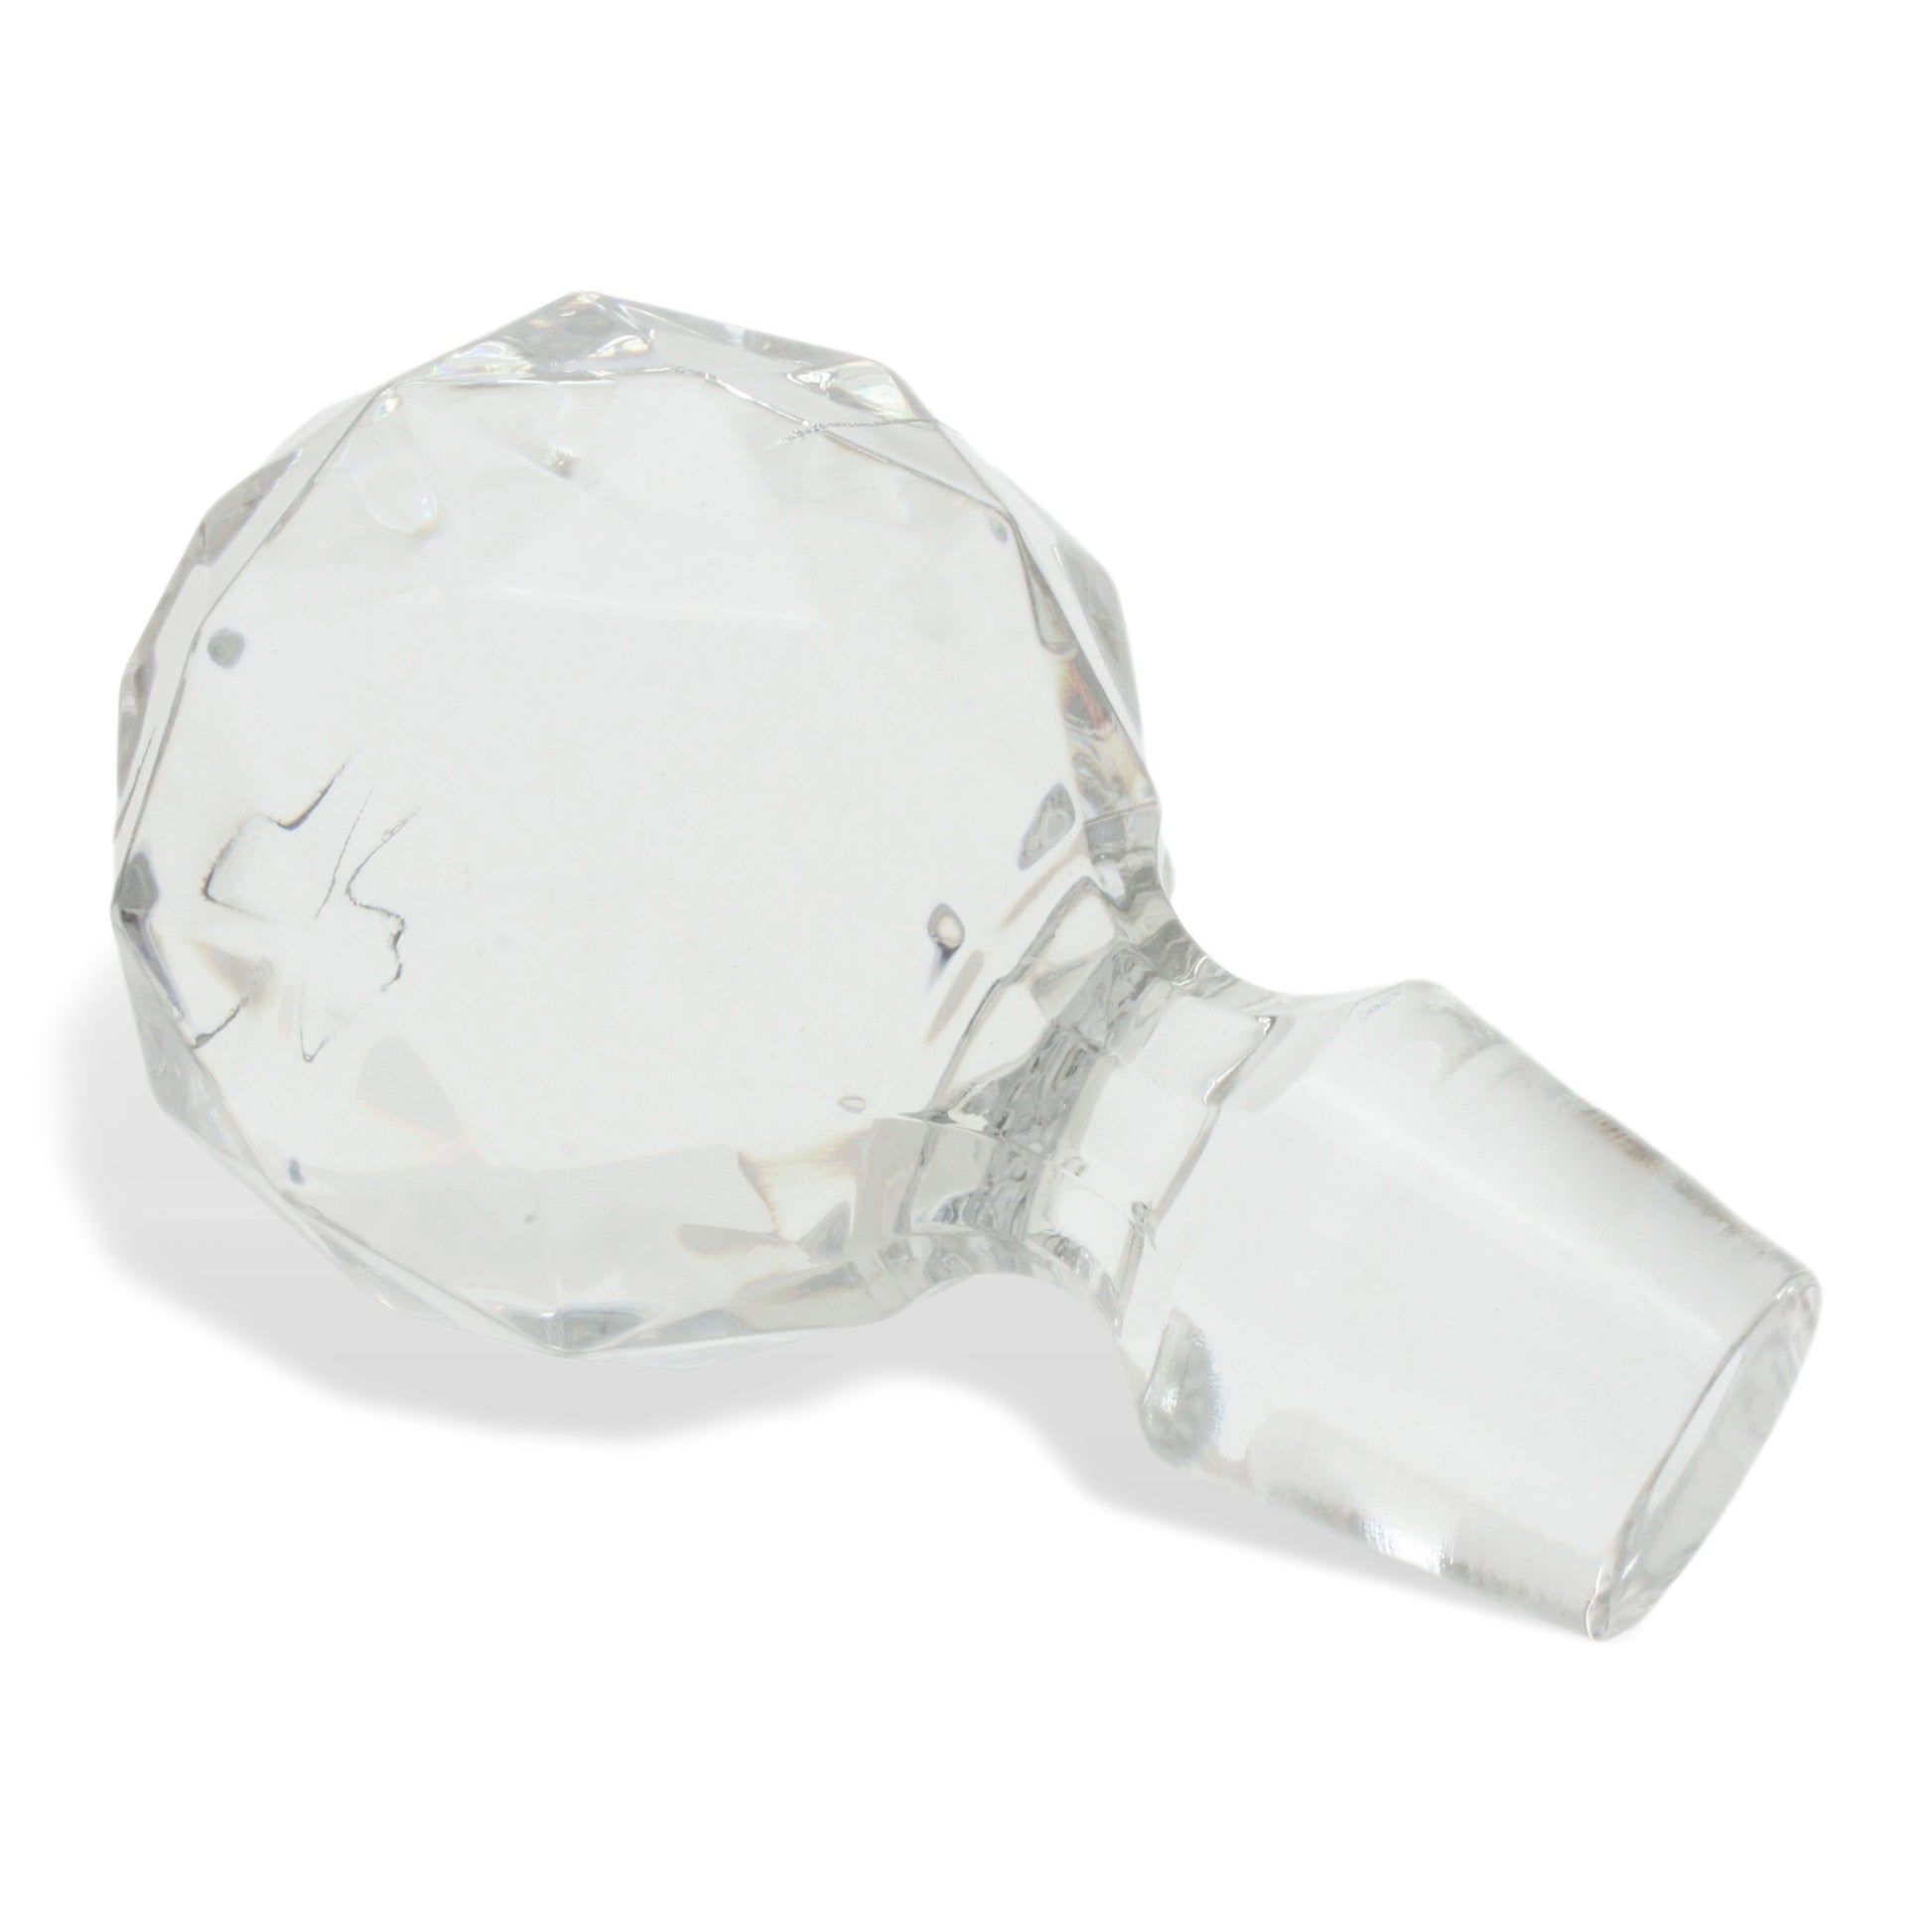 Replacement Glass Decanter Stoppers -  UK